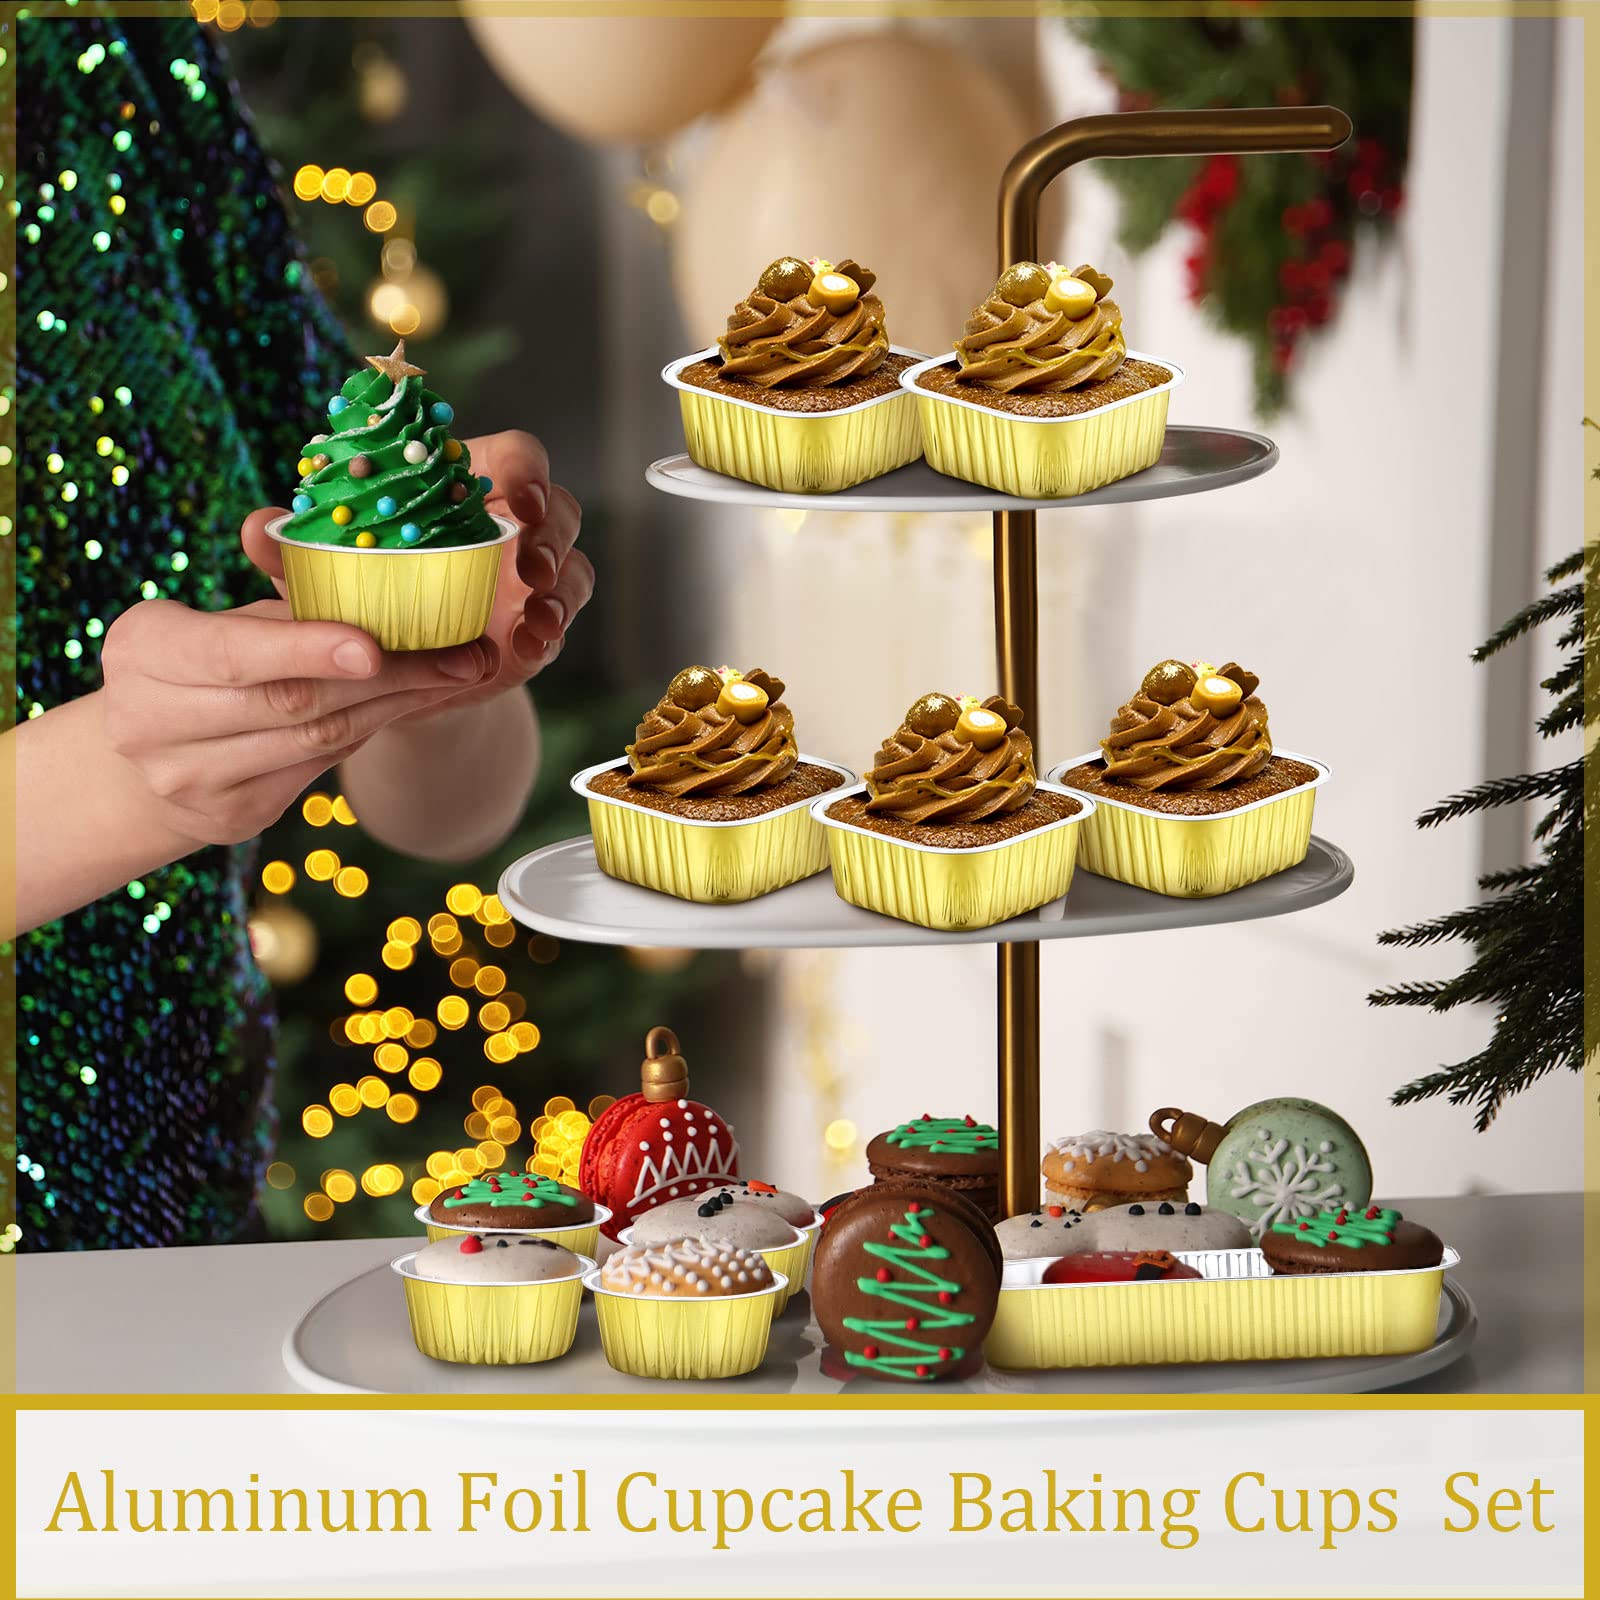 120 Sets 3 Shapes Disposable Mini Aluminum Foil Baking Cups With Lids, 5oz Mini Loaf Pans, 5oz Square Baking Cups, 7oz Muffin Tins, Dessert Cups With Lids for Bread Muffin Brownie Cheesecake